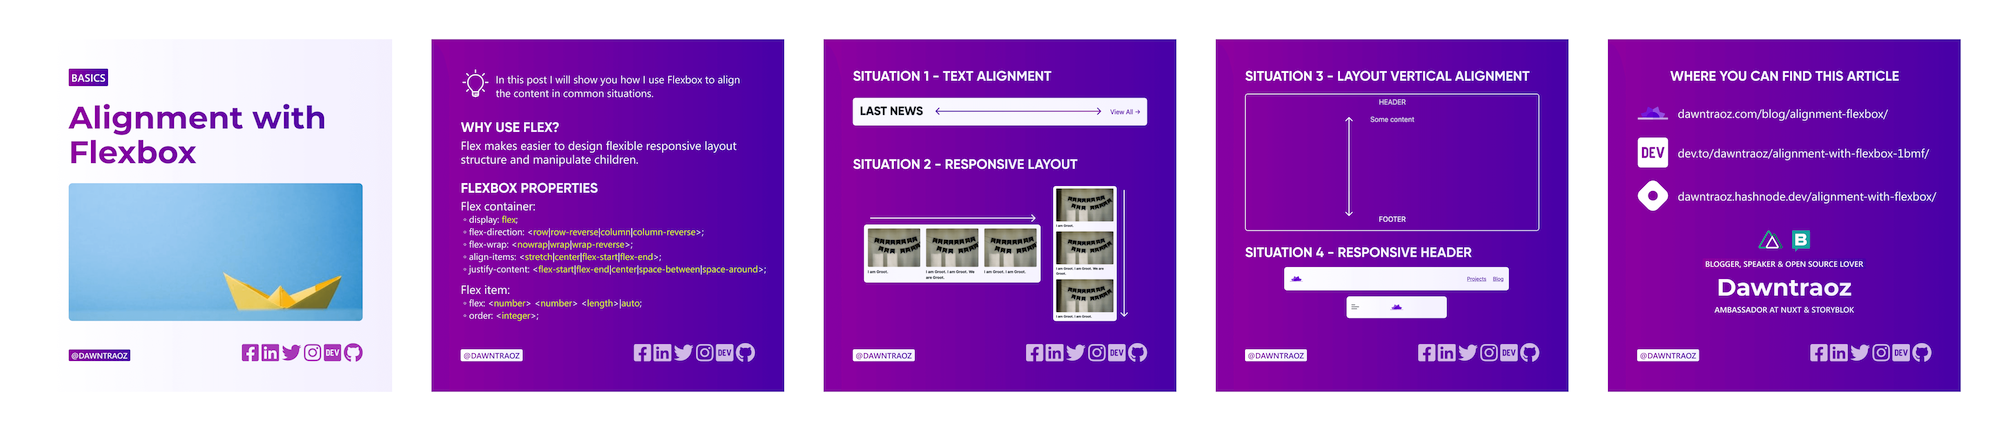 Instagram post summary for the article Alignment with Flexbox